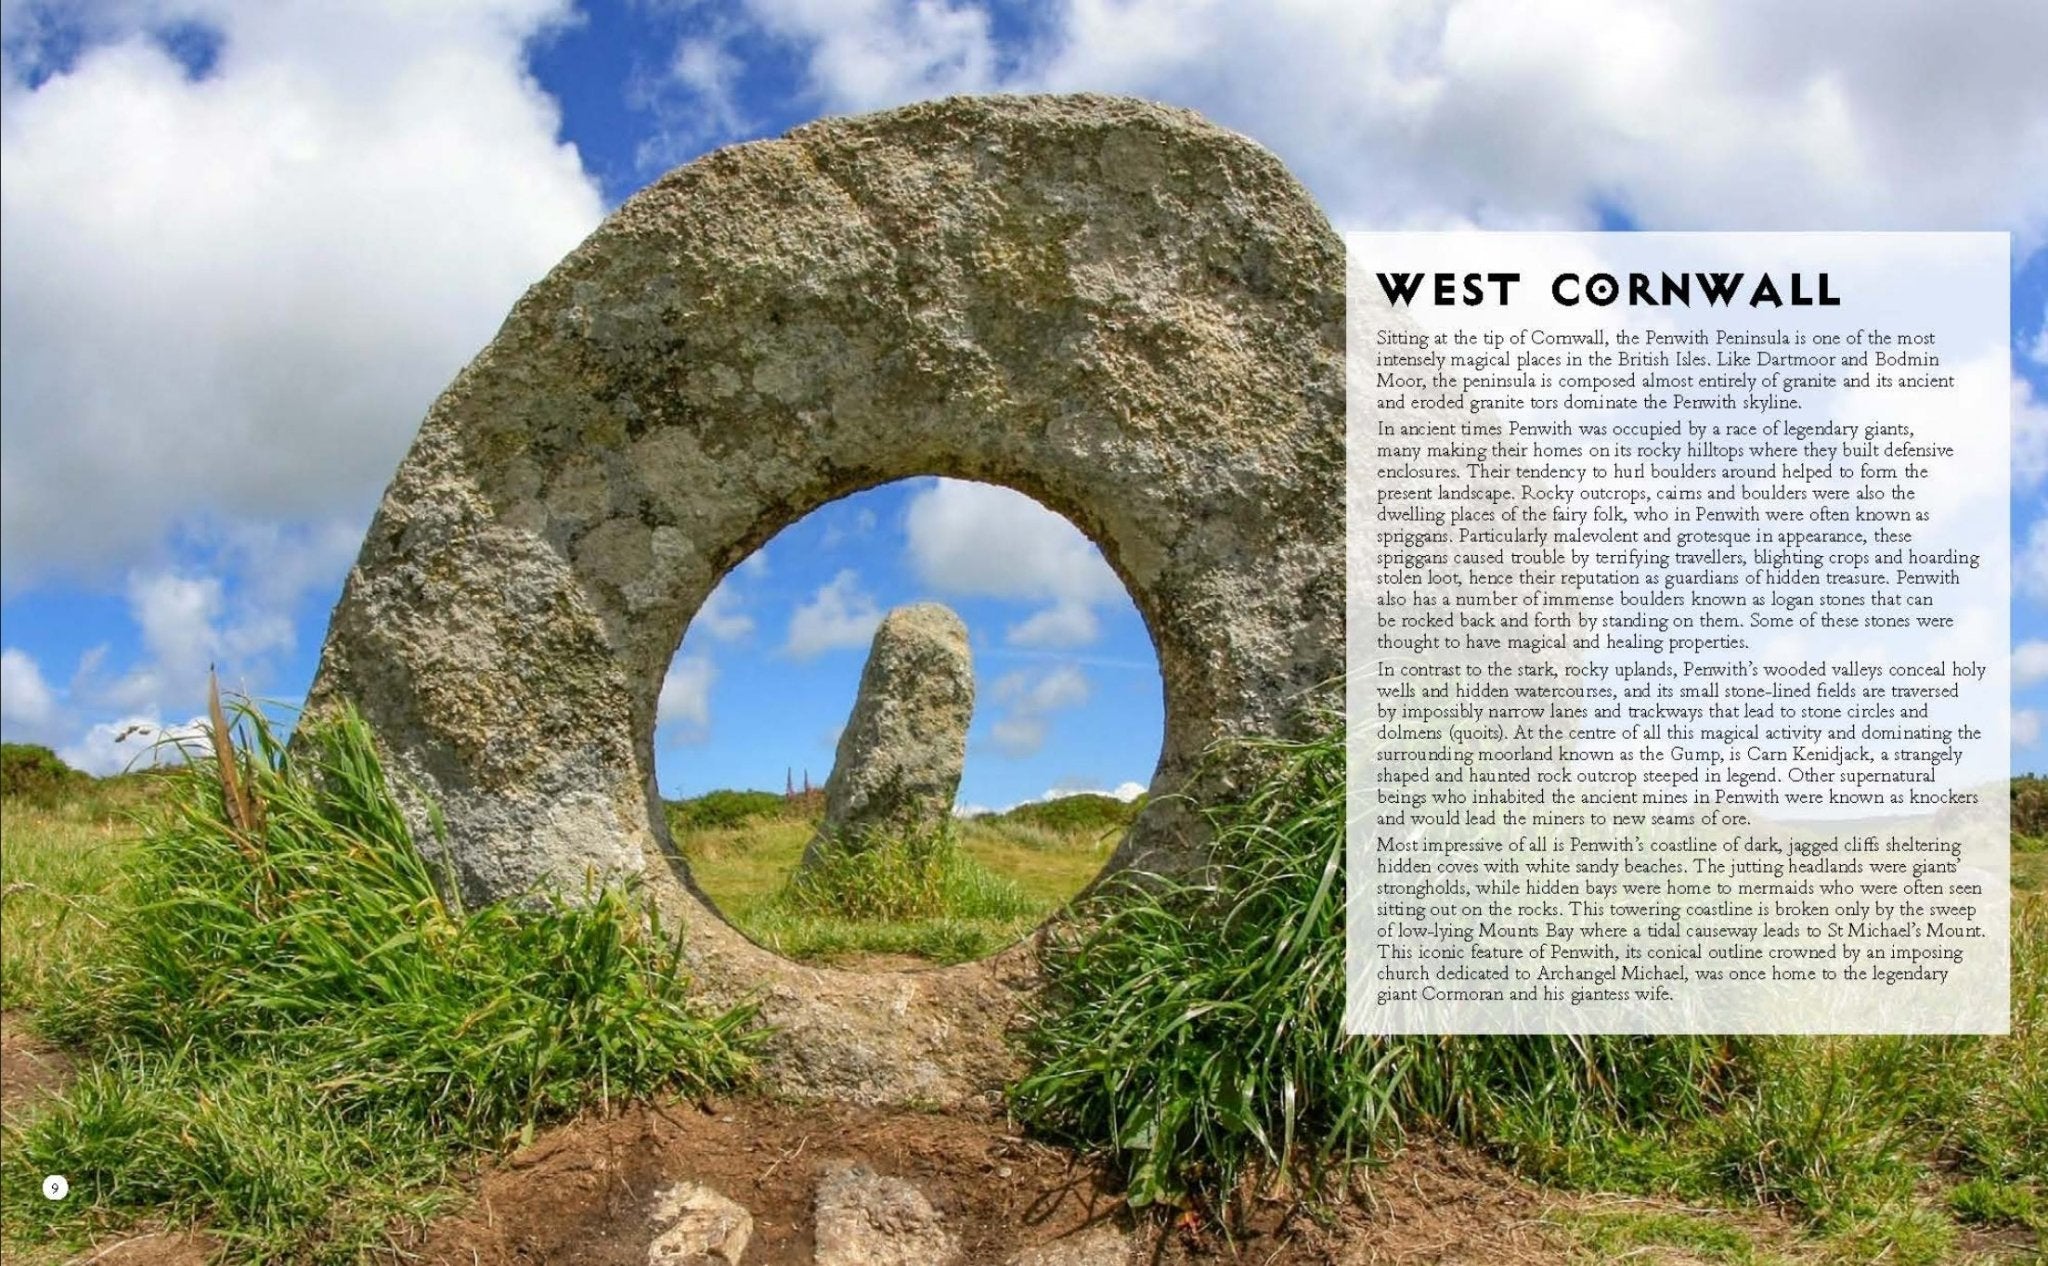 Magical Britain by Rob Wildwood - West Cornwall